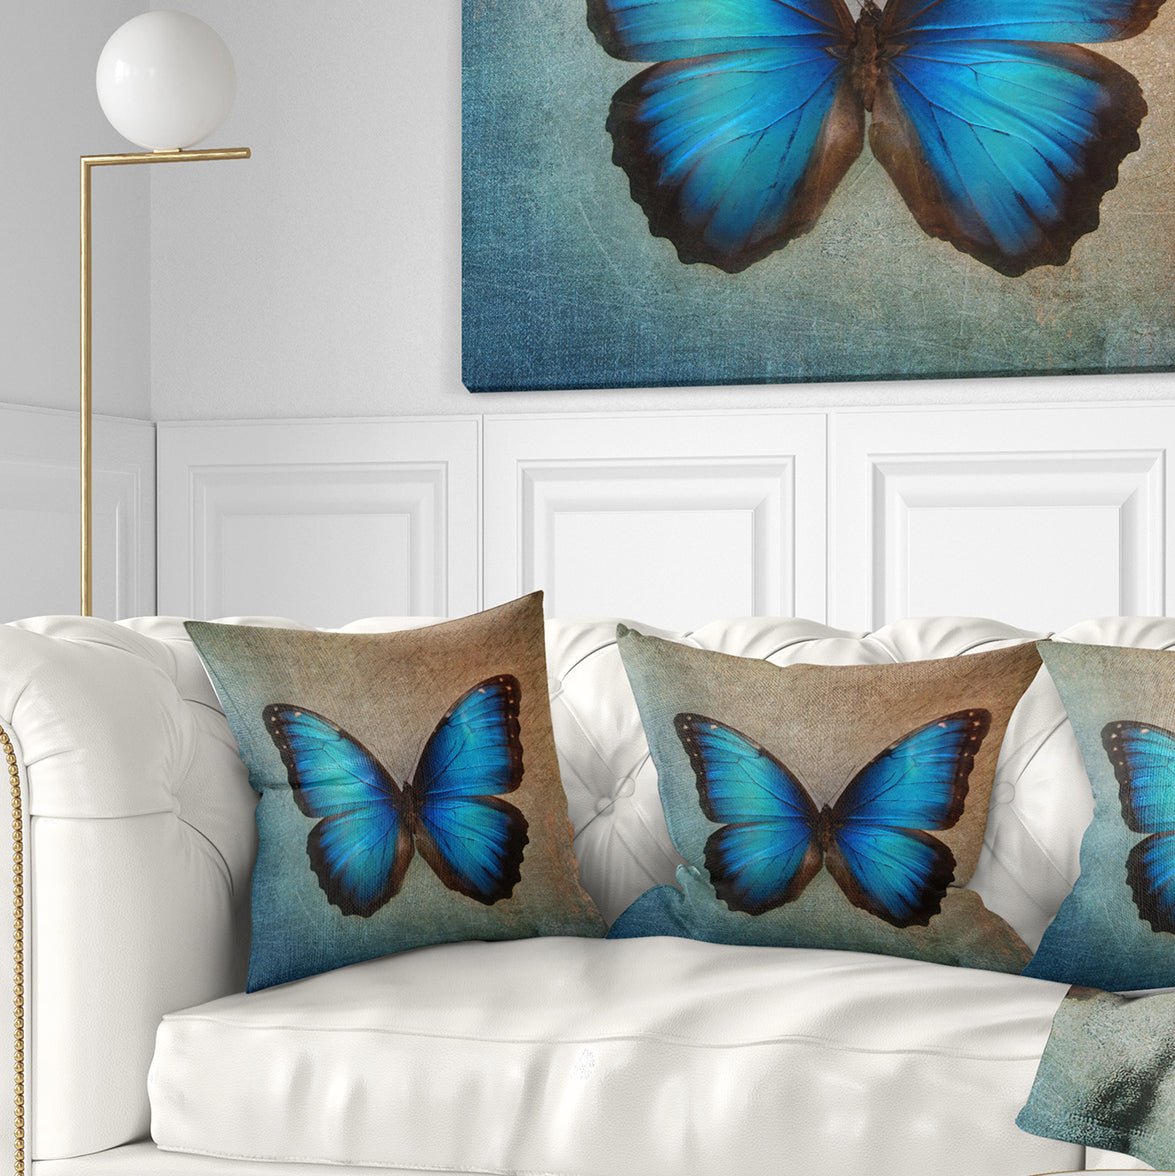 Blue Vintage Butterfly - Floral Throw Pillow